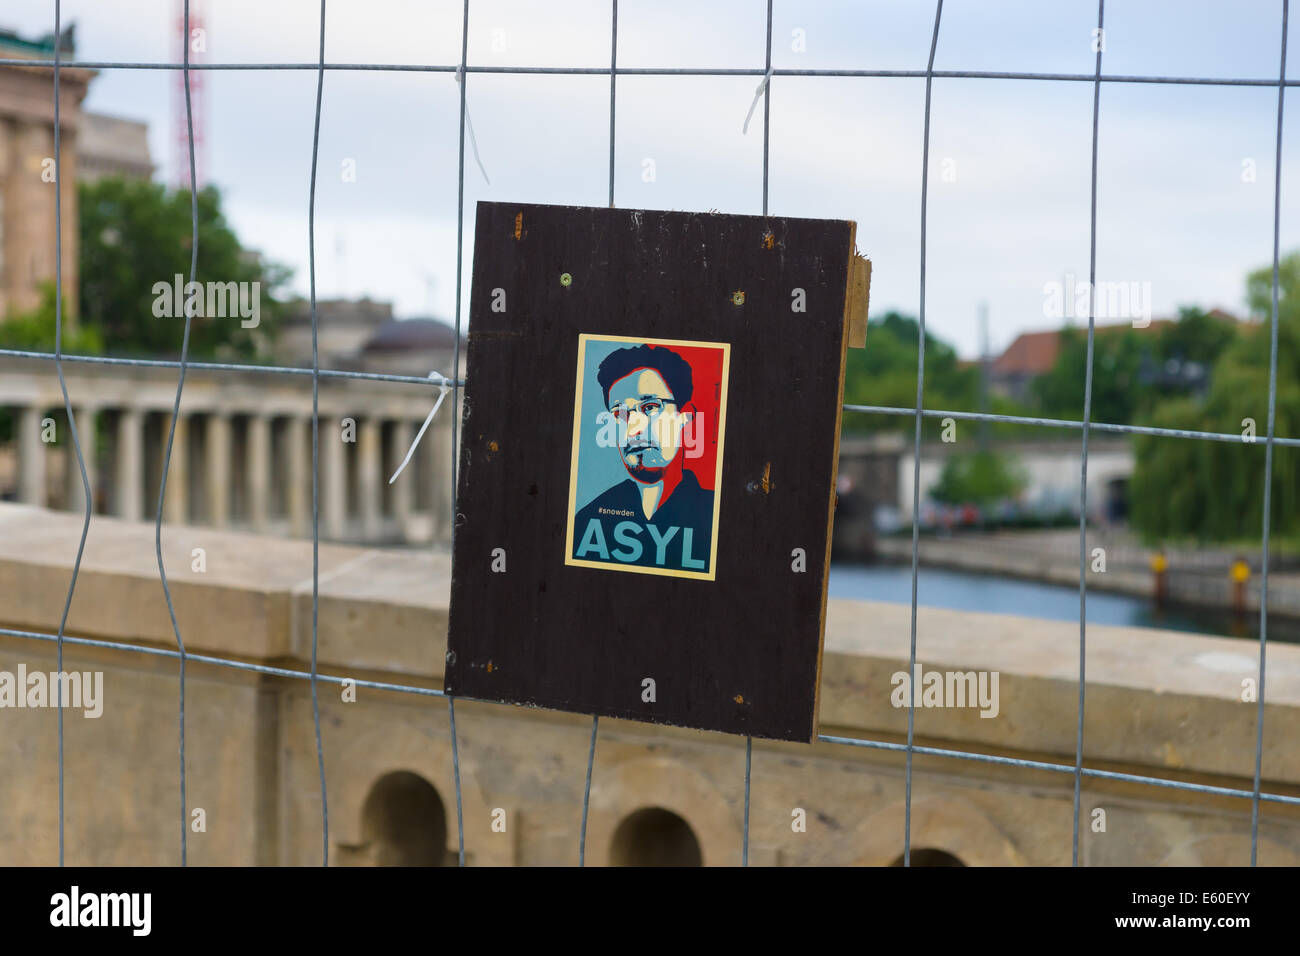 BERLIN, GERMANY - JUNE 06, 2014: Stylized portrait of Edward Snowden on the fence. Former officer of the CIA and NSA. Stock Photo